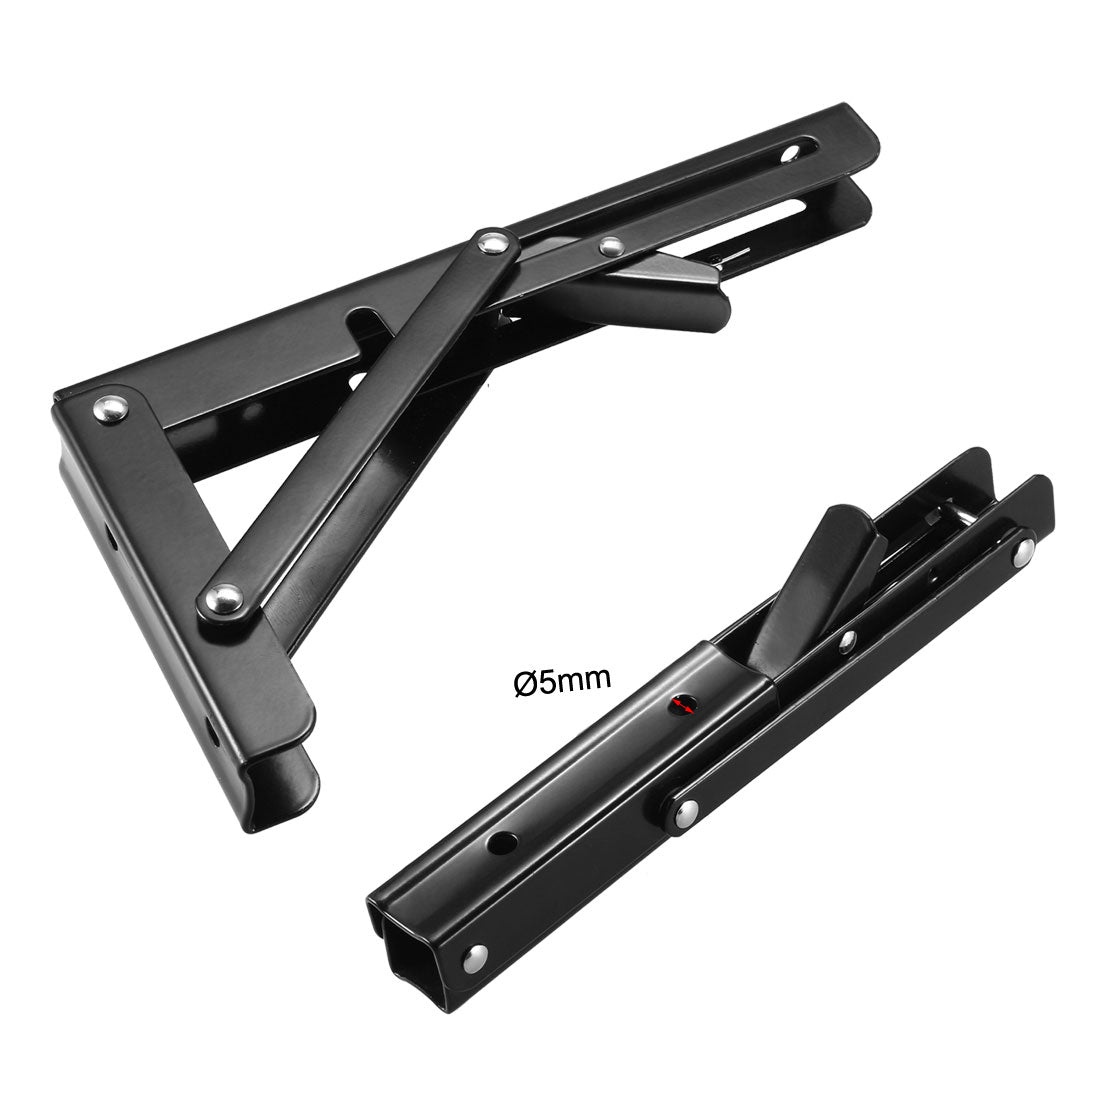 uxcell Uxcell Folding Bracket 8 inch 200mm for Shelves Table Desk Wall Mounted Support Collapsible Long Release Arm Space Saving Carbon Steel 2pcs